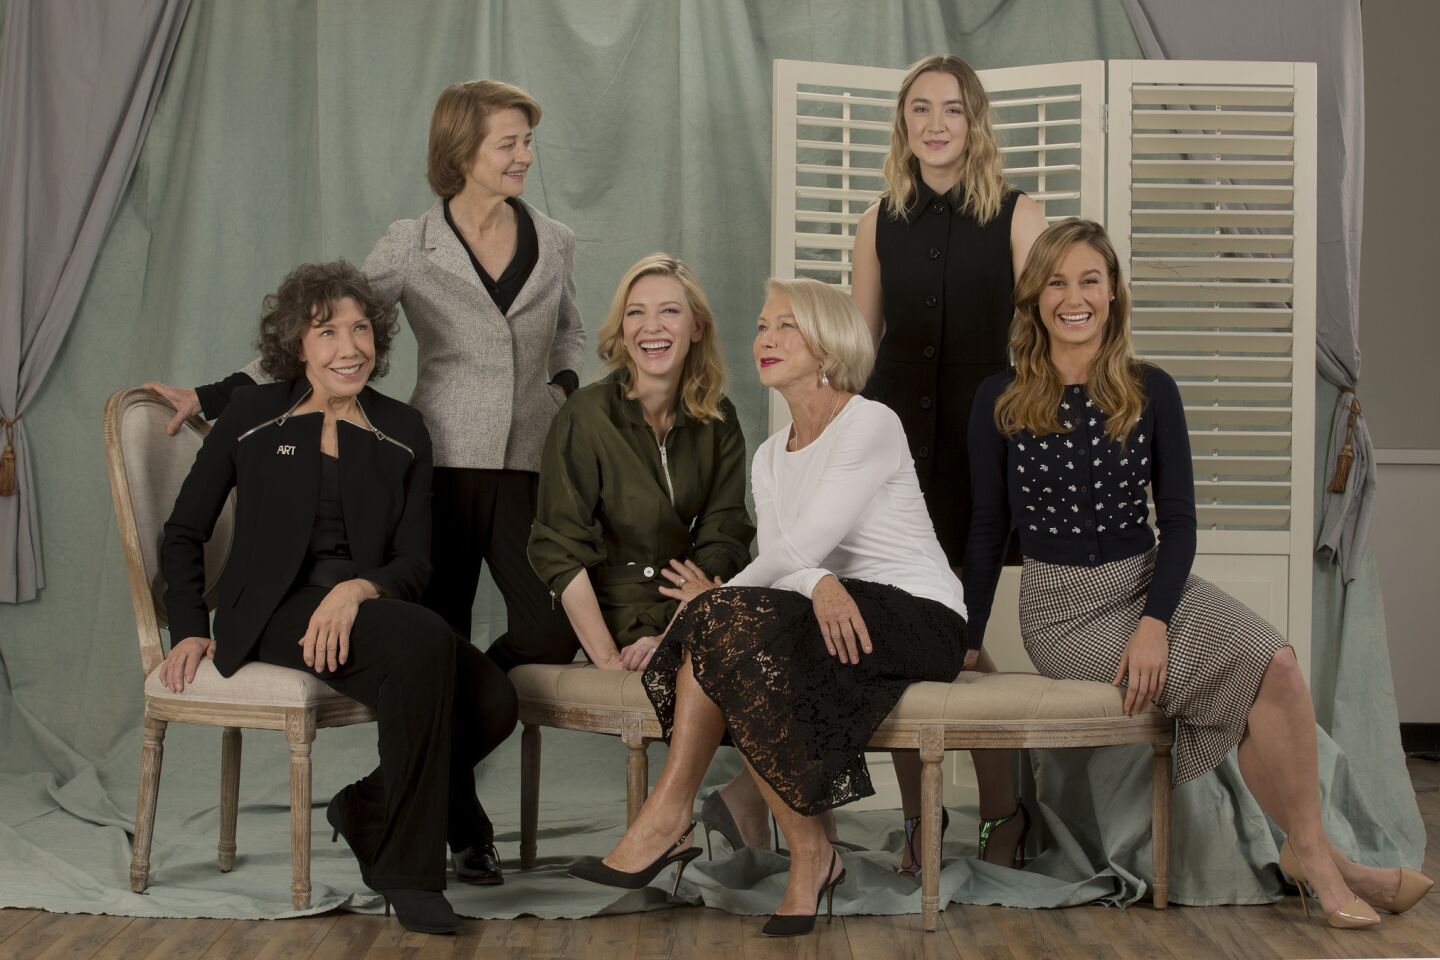 Celebrity portraits by The Times | Charlotte Rampling and Saoirse Ronan (l to r seated) Lily Tomlin, Cate Blanchett, Helen Mirren and Brie Larsen